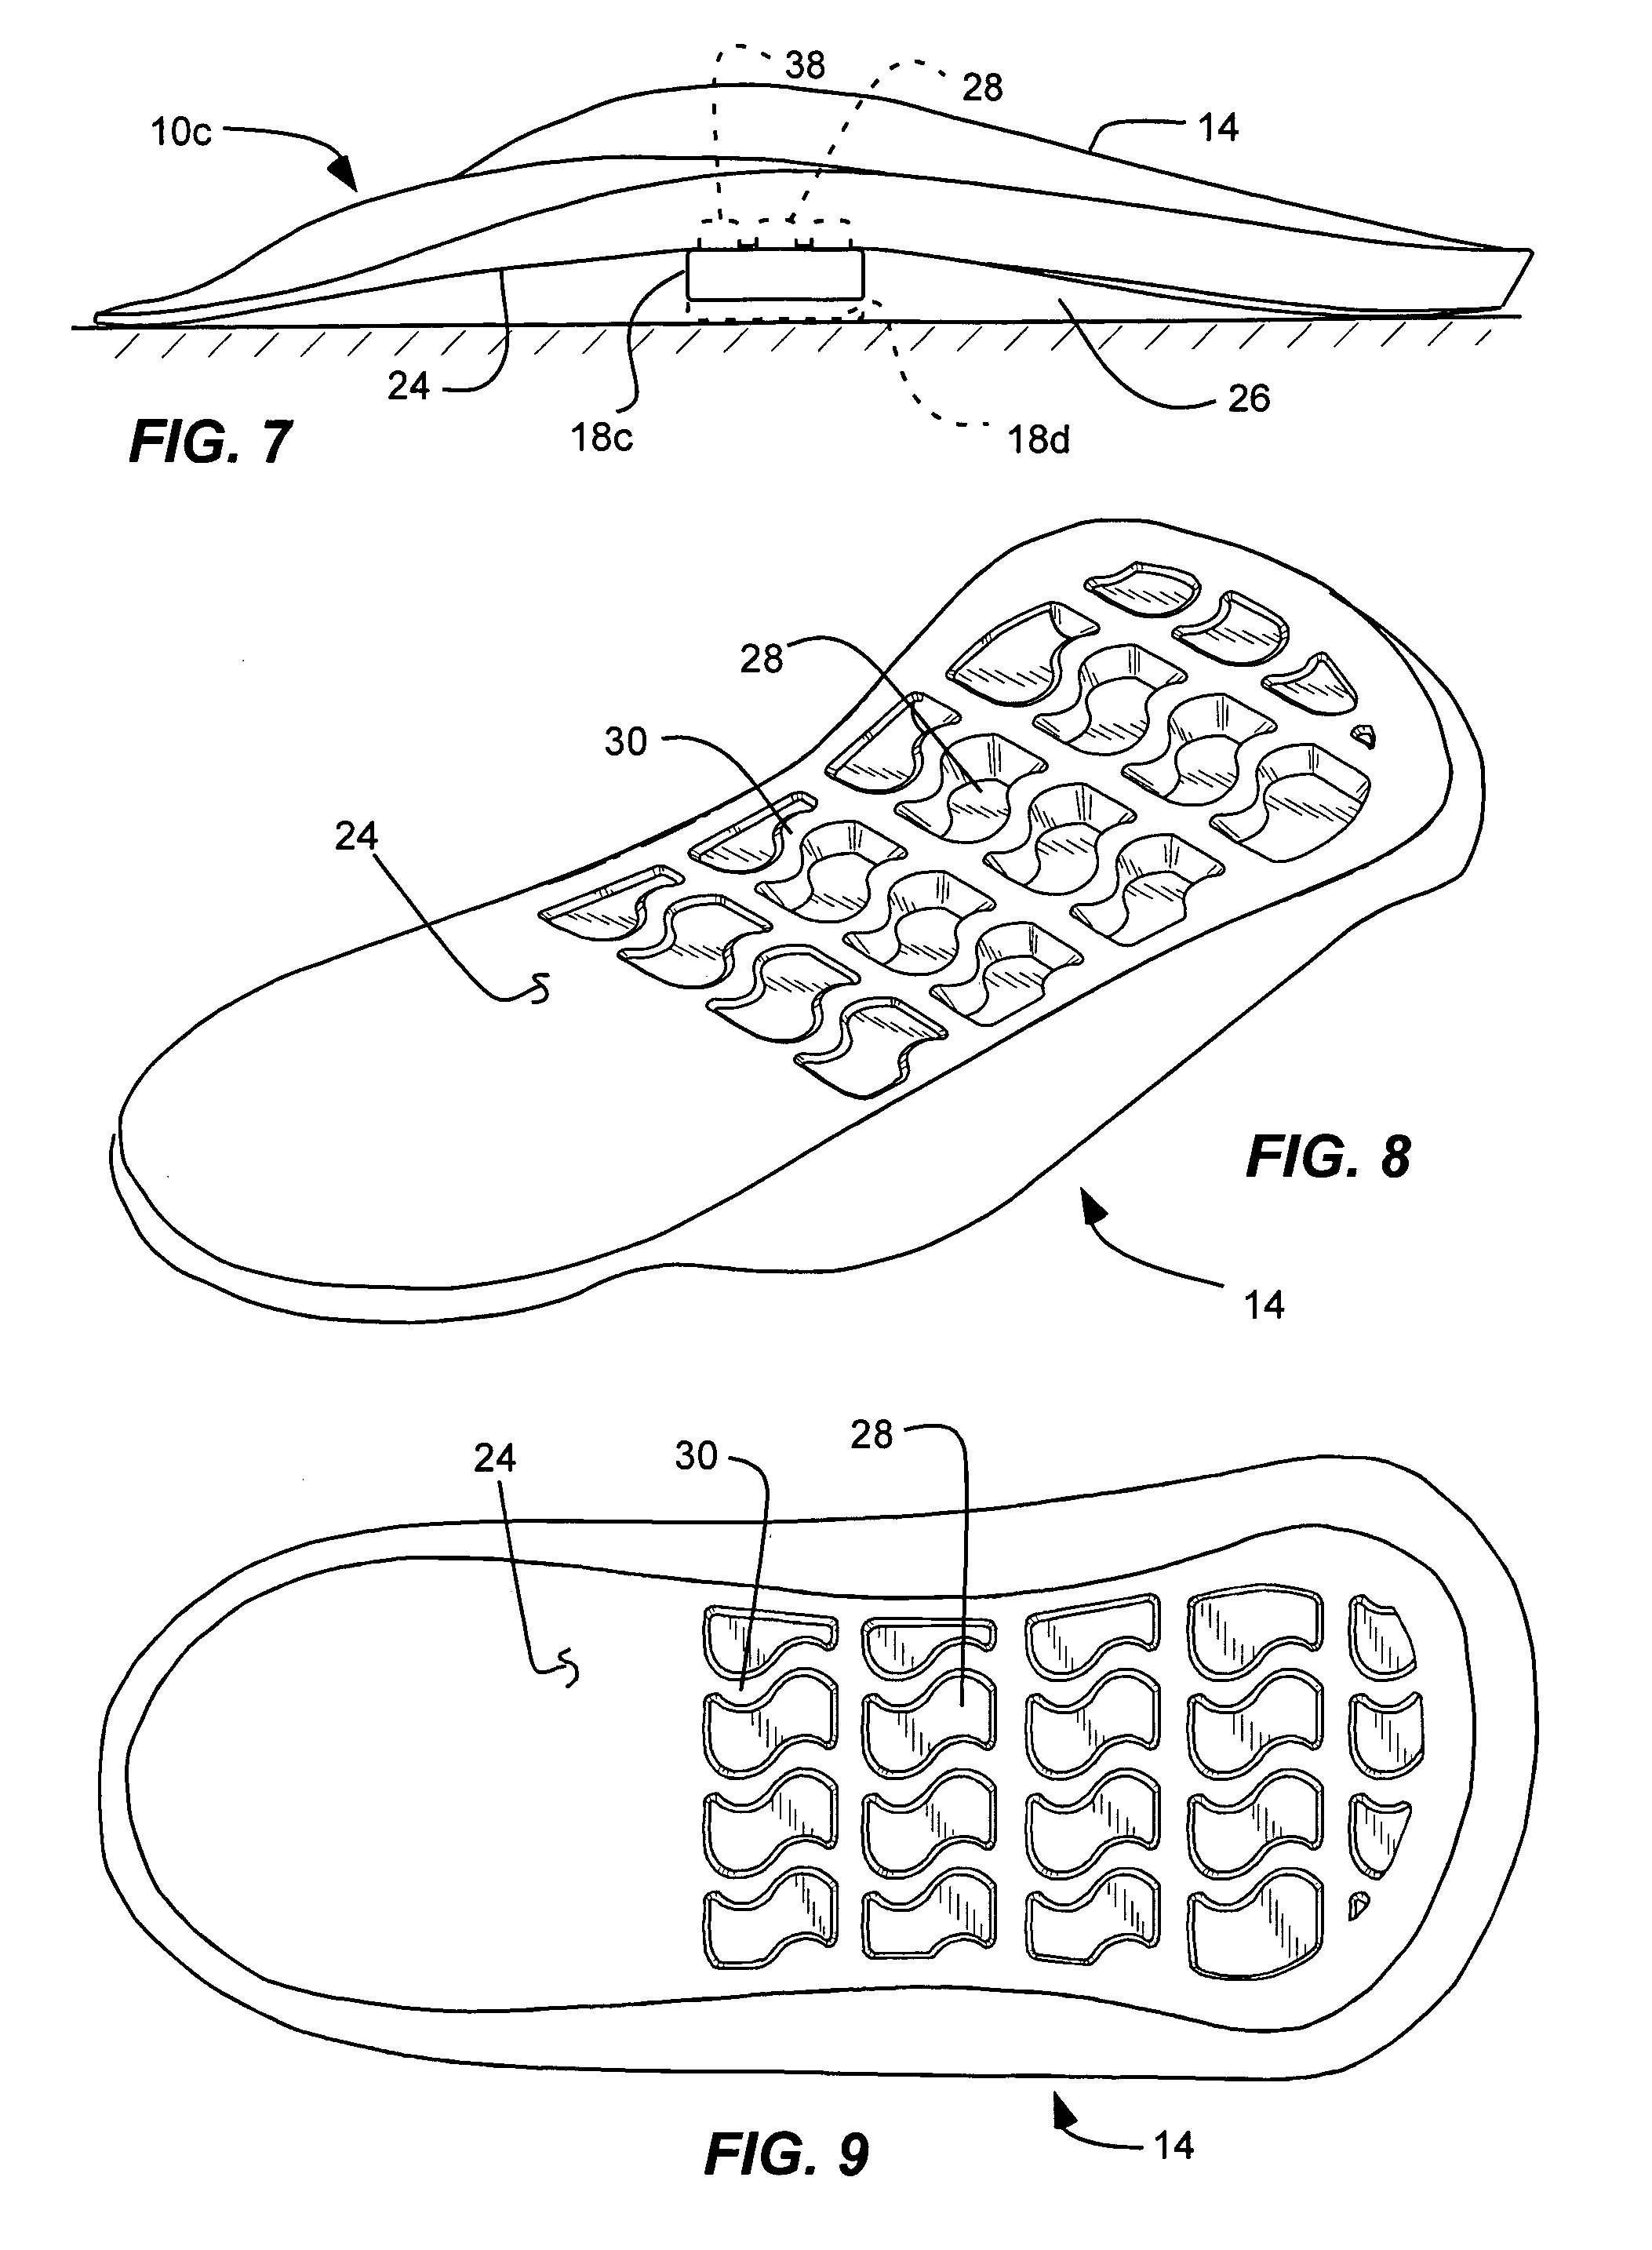 Arch support reinforcement device